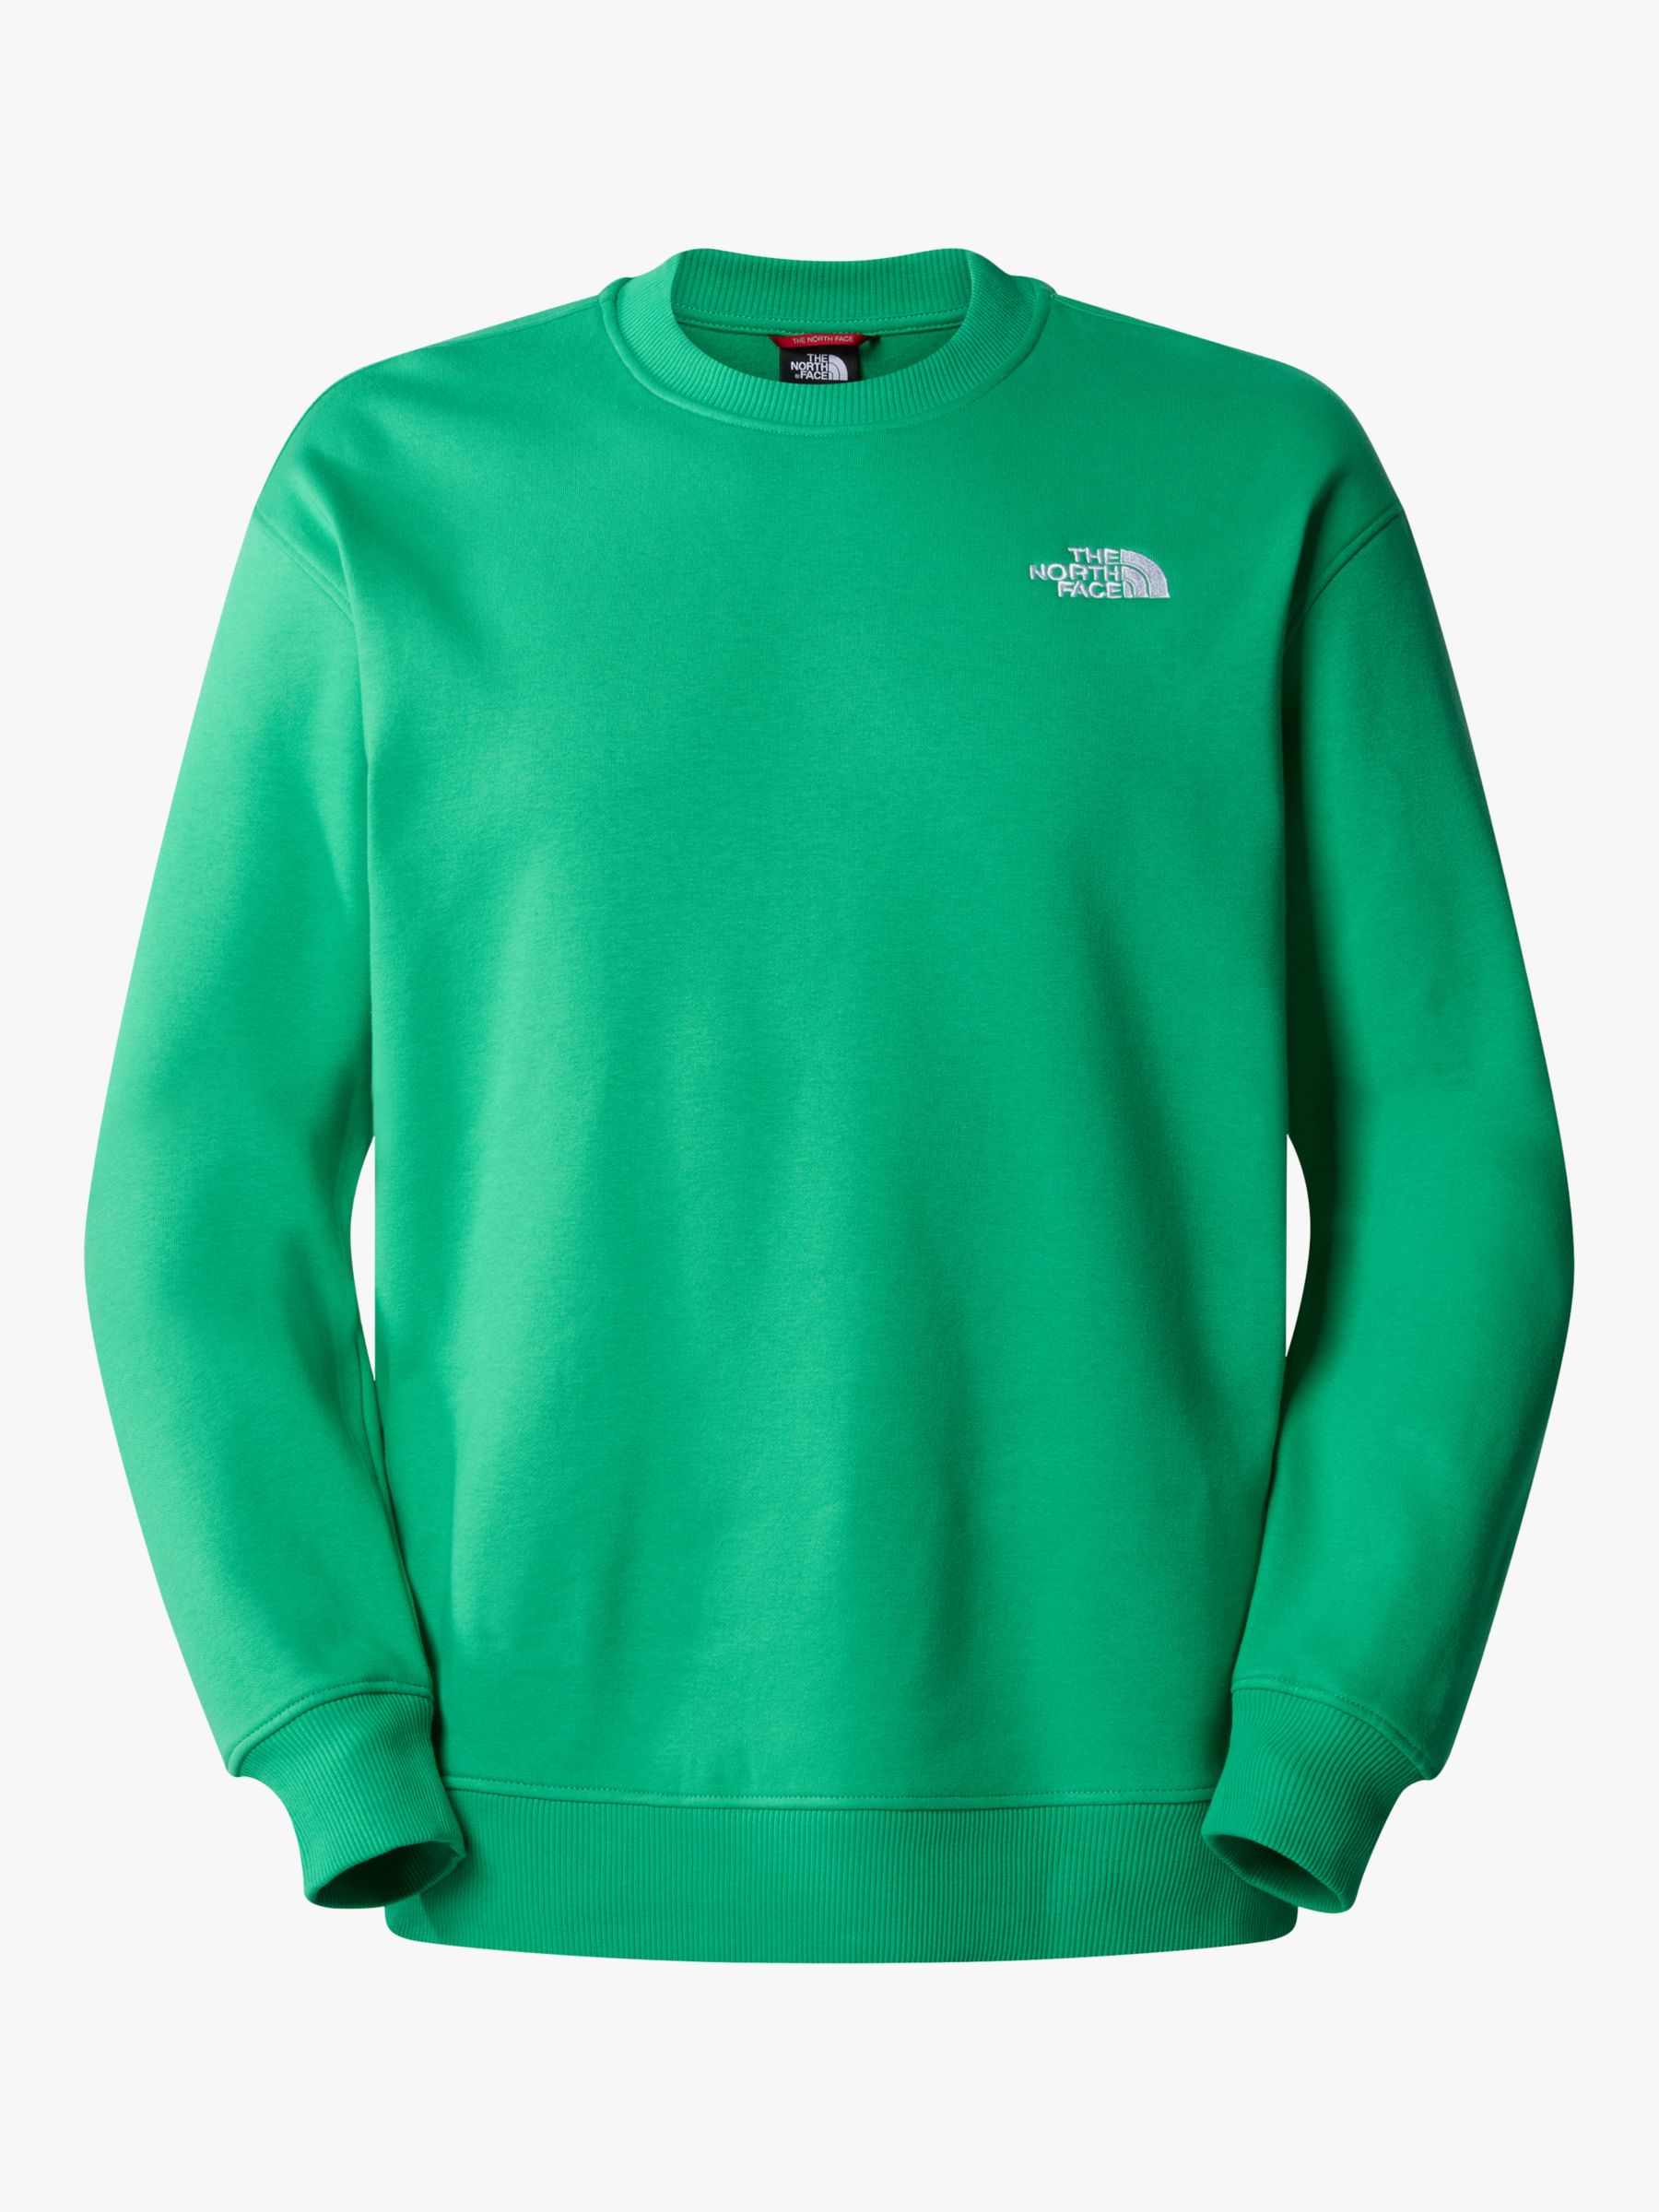 The North Face Essential Crew Jumper, Green, XL